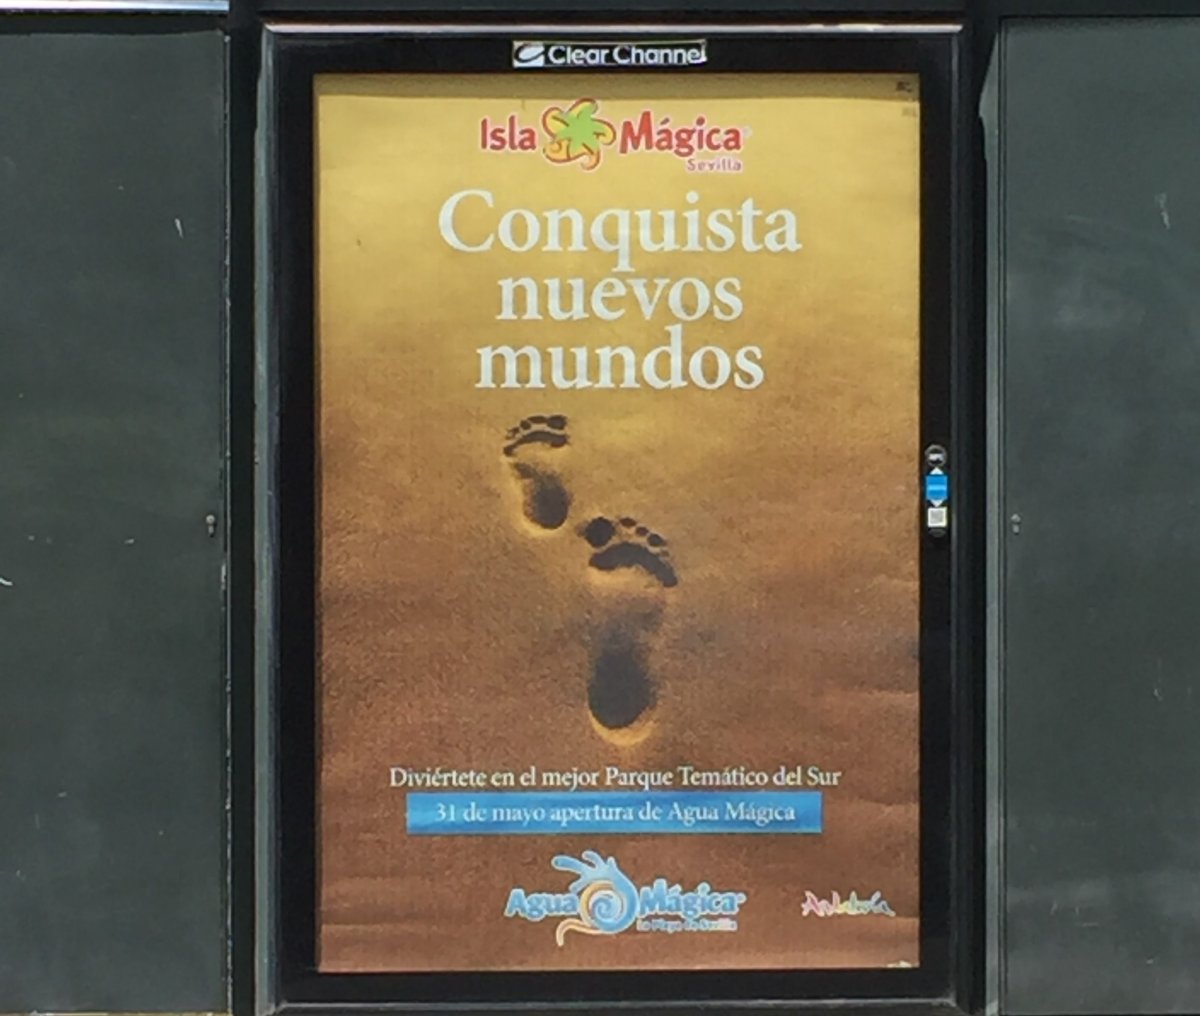 'Conquer New Worlds' street ad for the Magic Island waterpark in Seville, Spain.